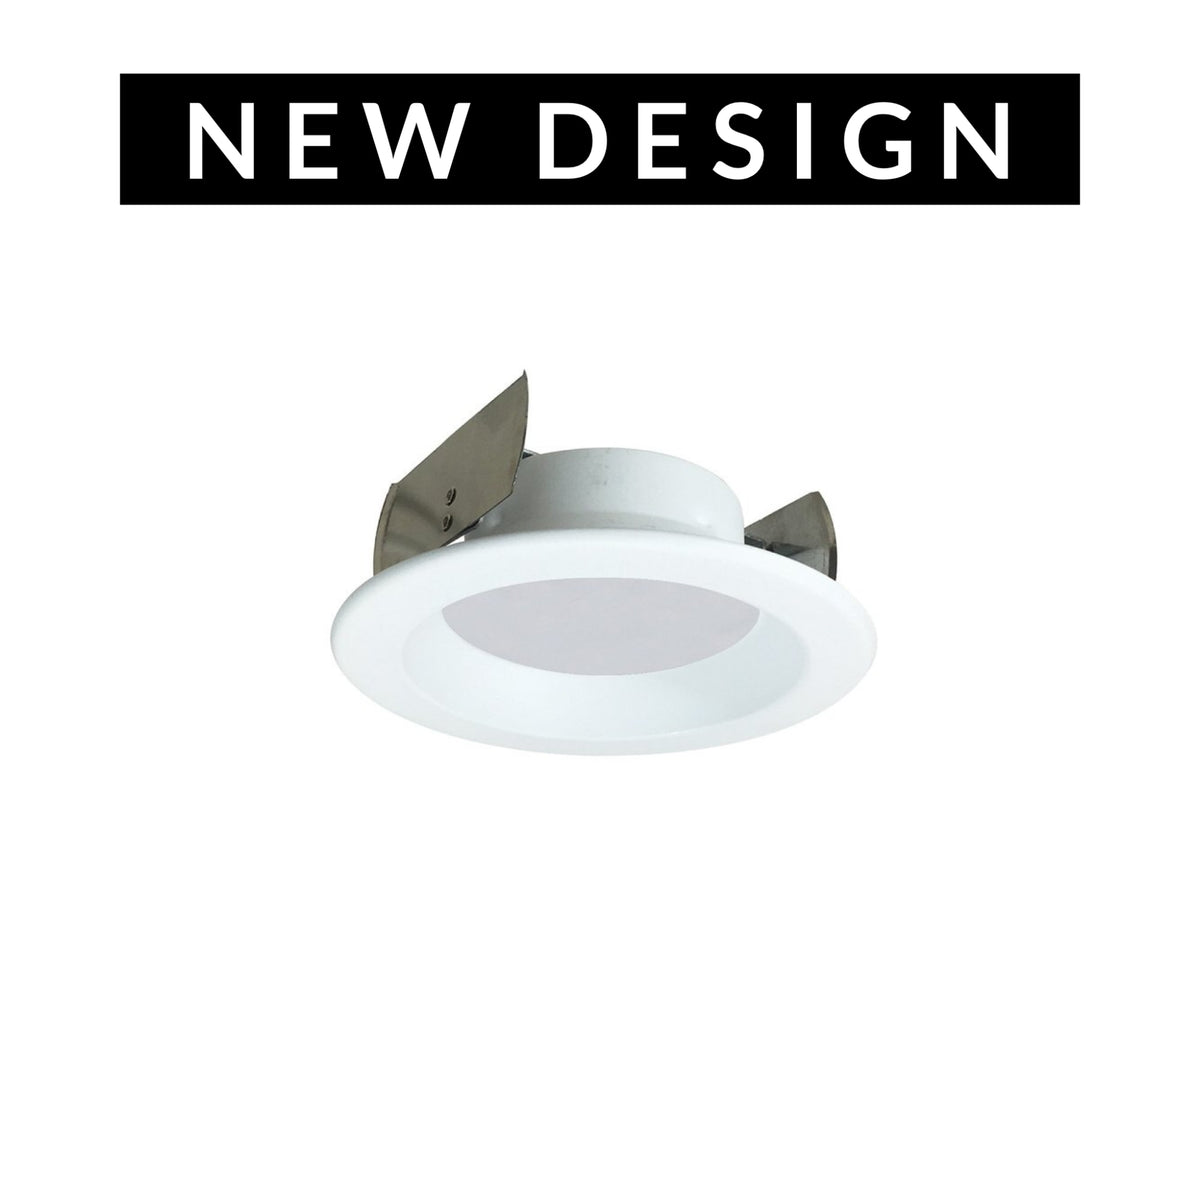 NORA NOX-43130WW 4 inch LED 3K Dimmable Recessed Trim Smooth NOXAC-431 Coastal Lighting